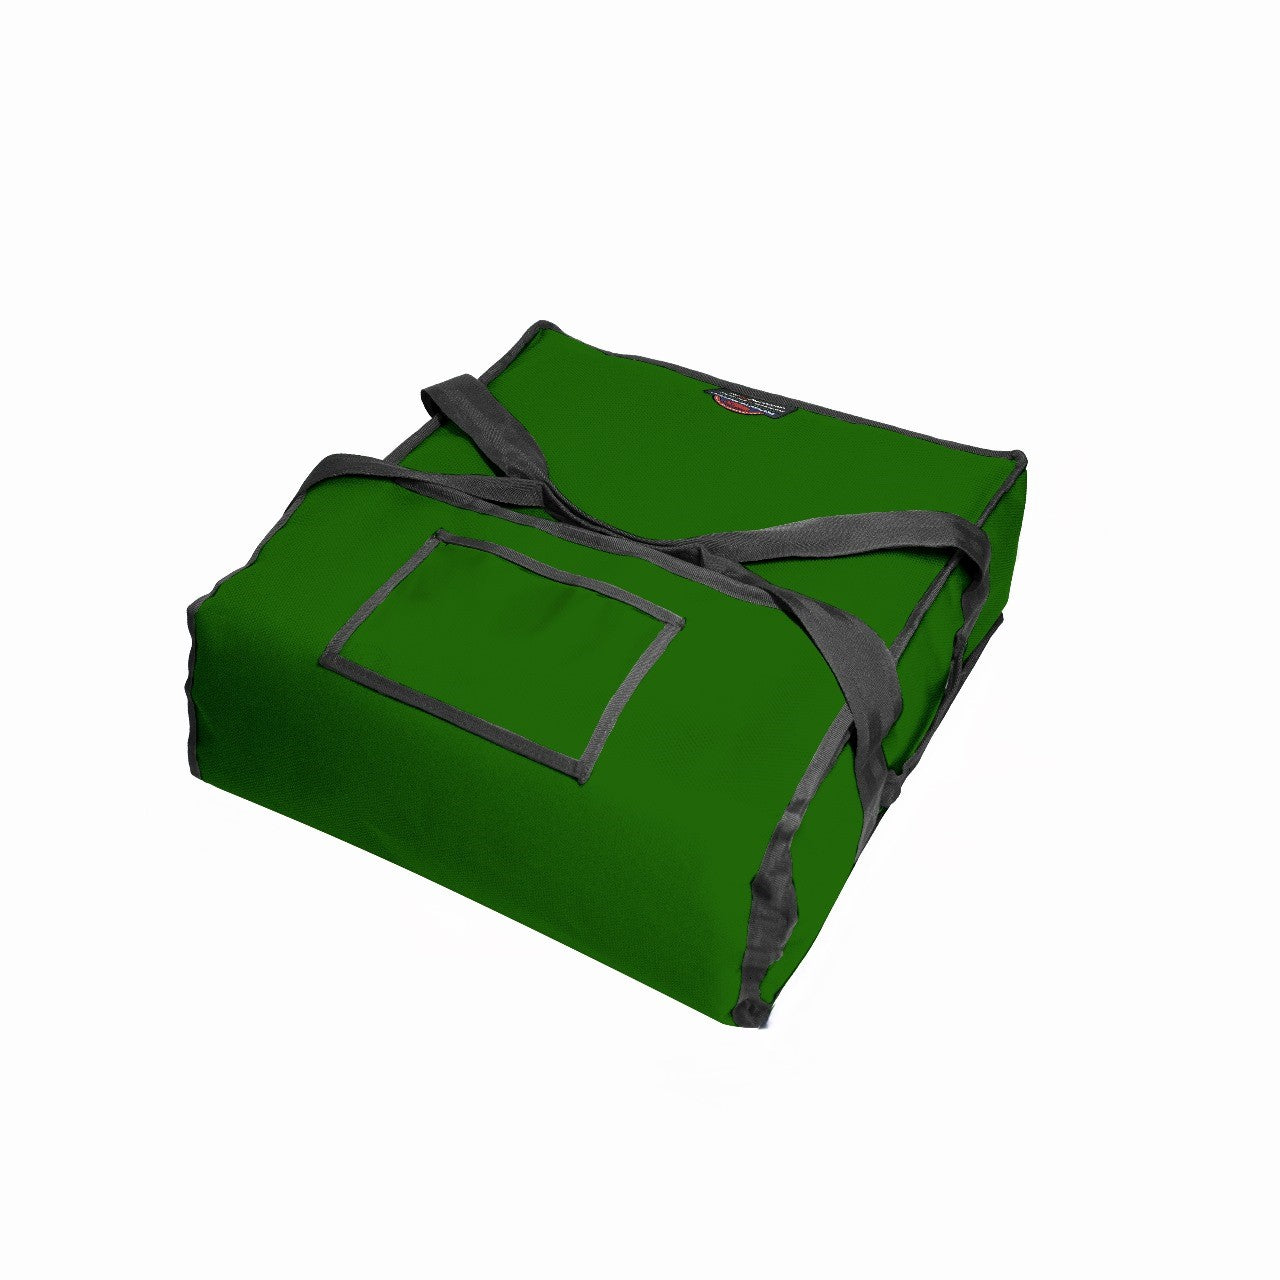 PB22-1618-GRN 16" - 18" Pizza Delivery Bag (Green) UPC: 850024511071